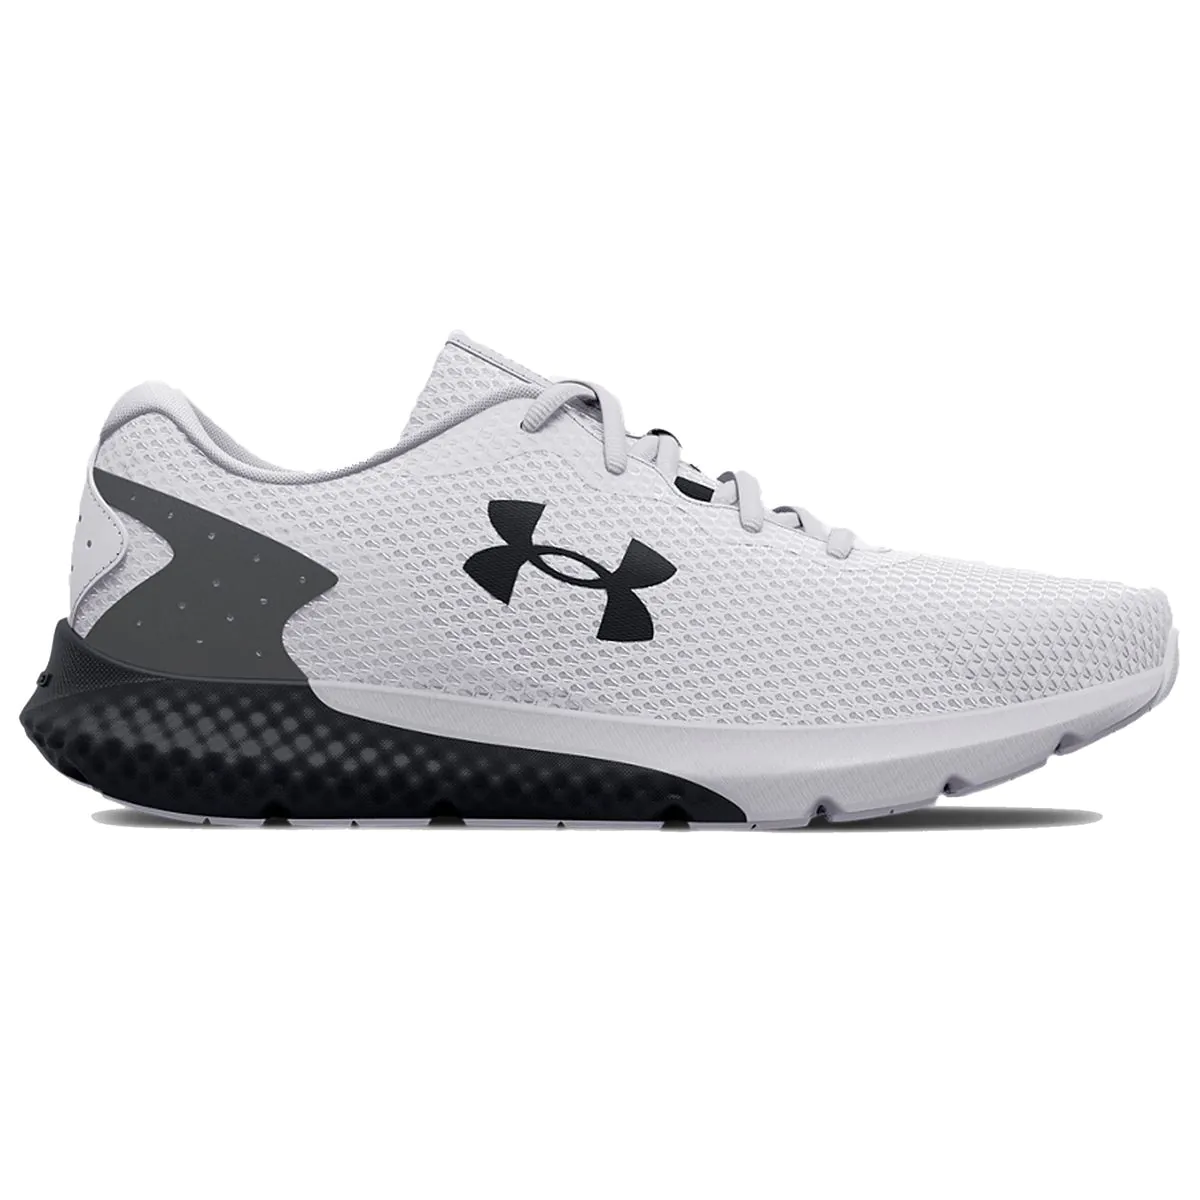 Under Armour Charged Rogue 3 Men's Running Shoes 3024877-104